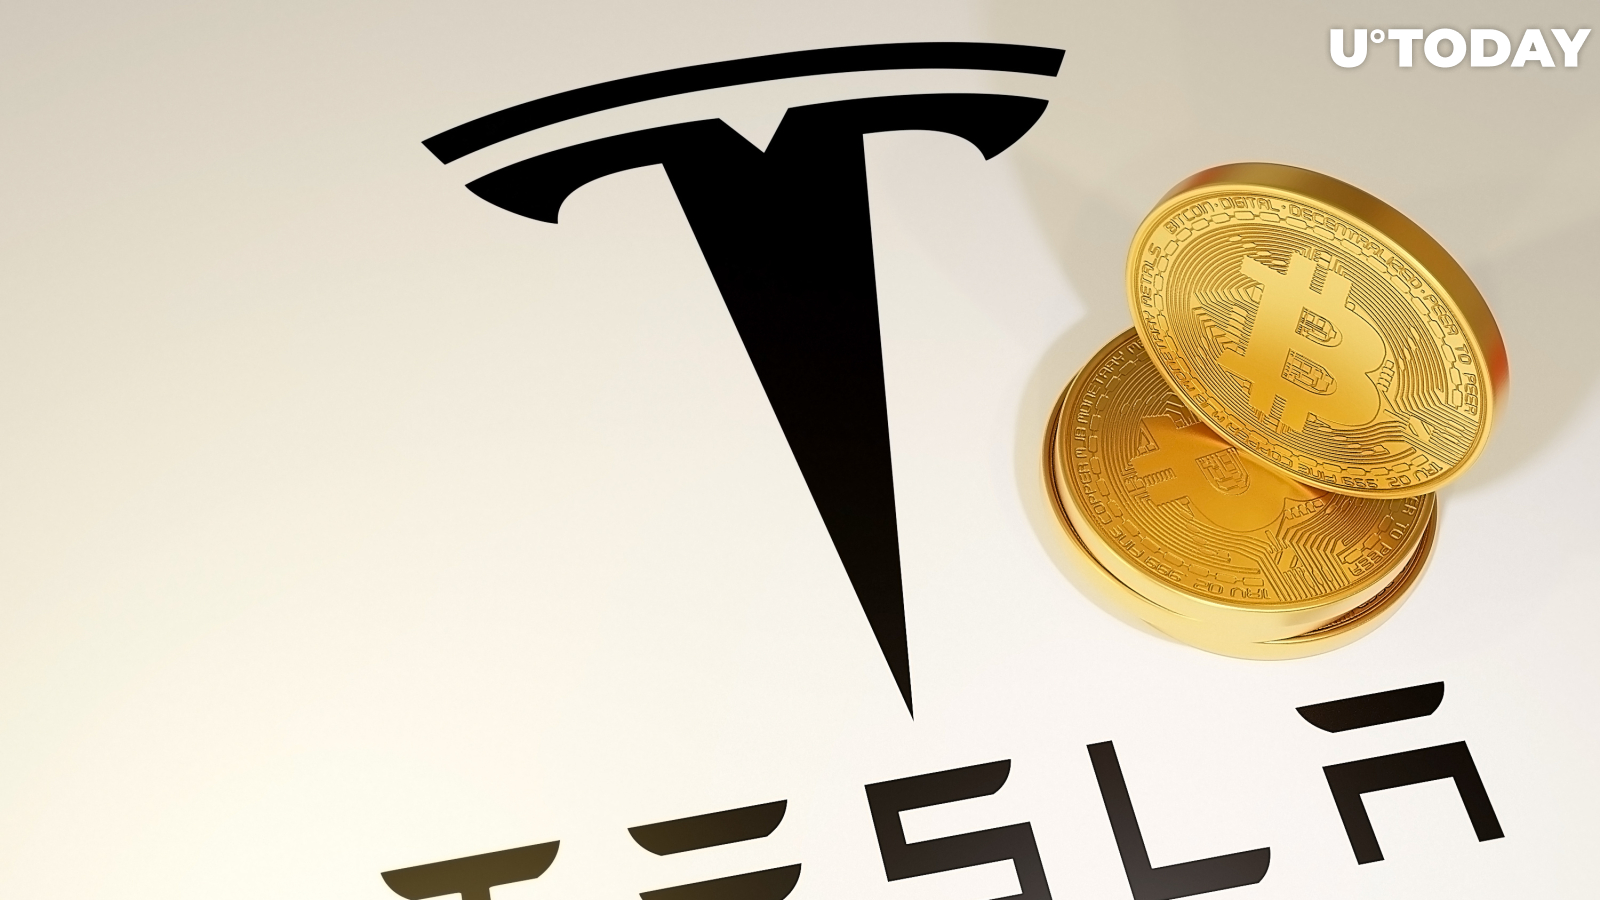 Elon Musk Says Tesla Will "Most Likely" Resume Accepting Bitcoin